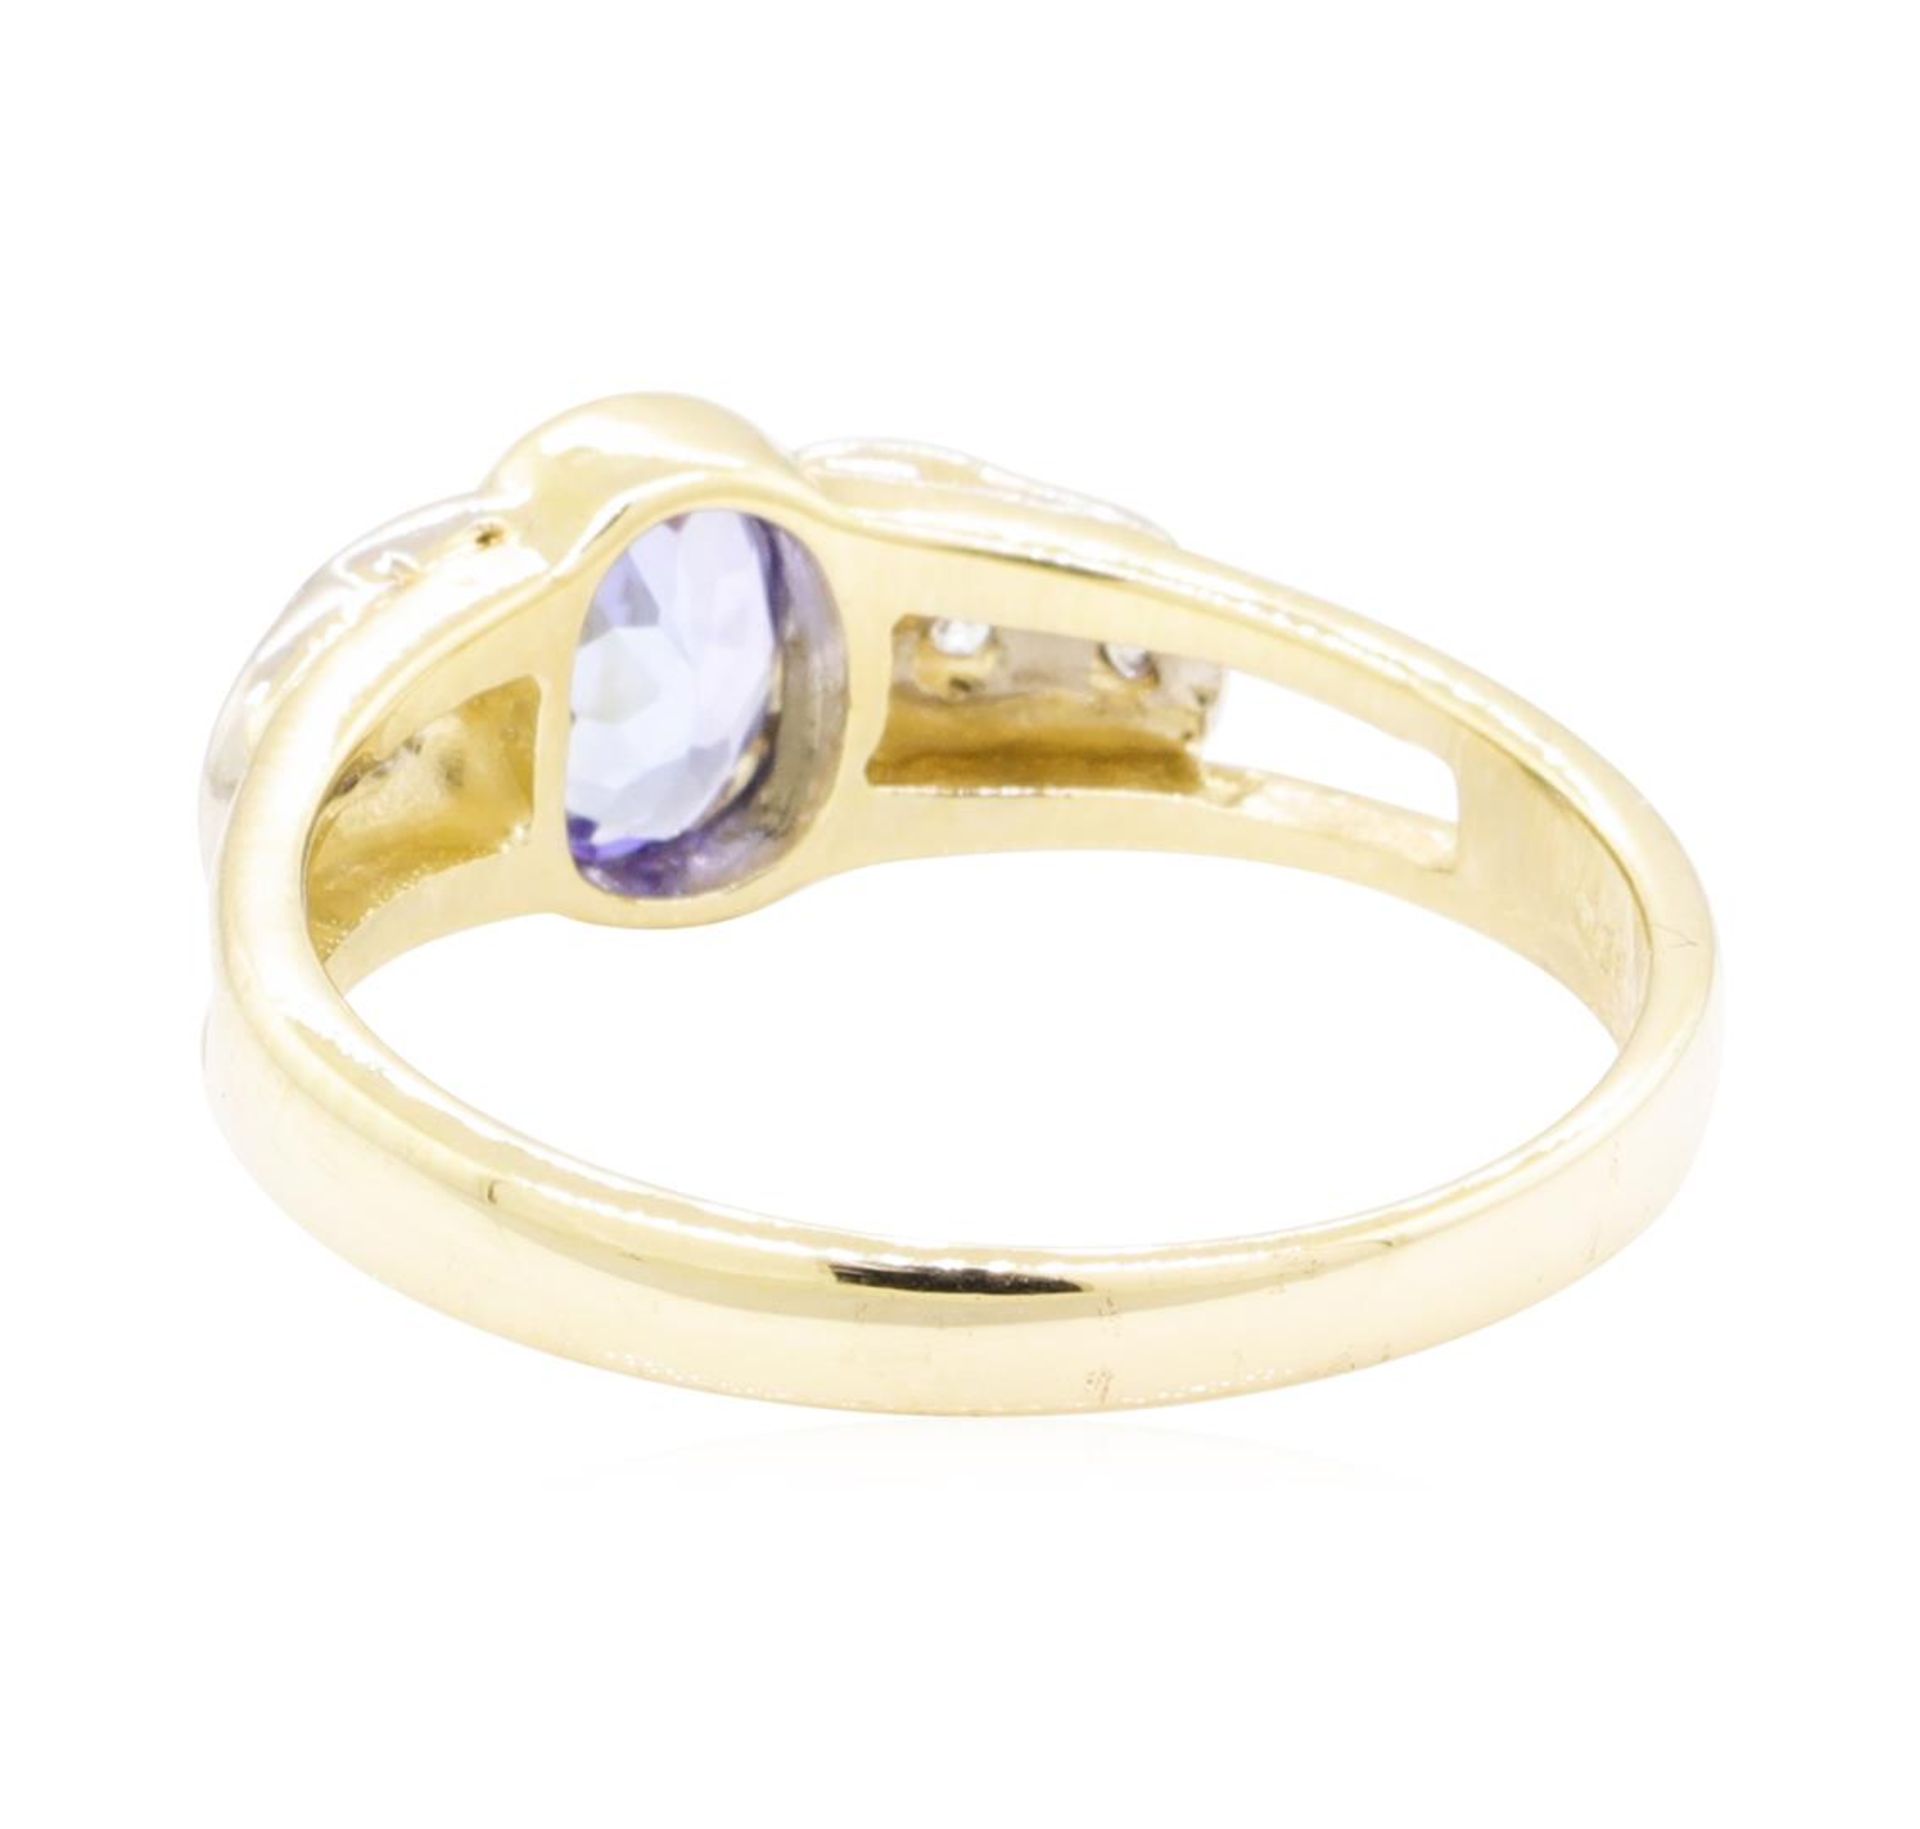 0.86 ctw Tanzanite And Diamond Ring - 14KT Yellow And White Gold - Image 3 of 5